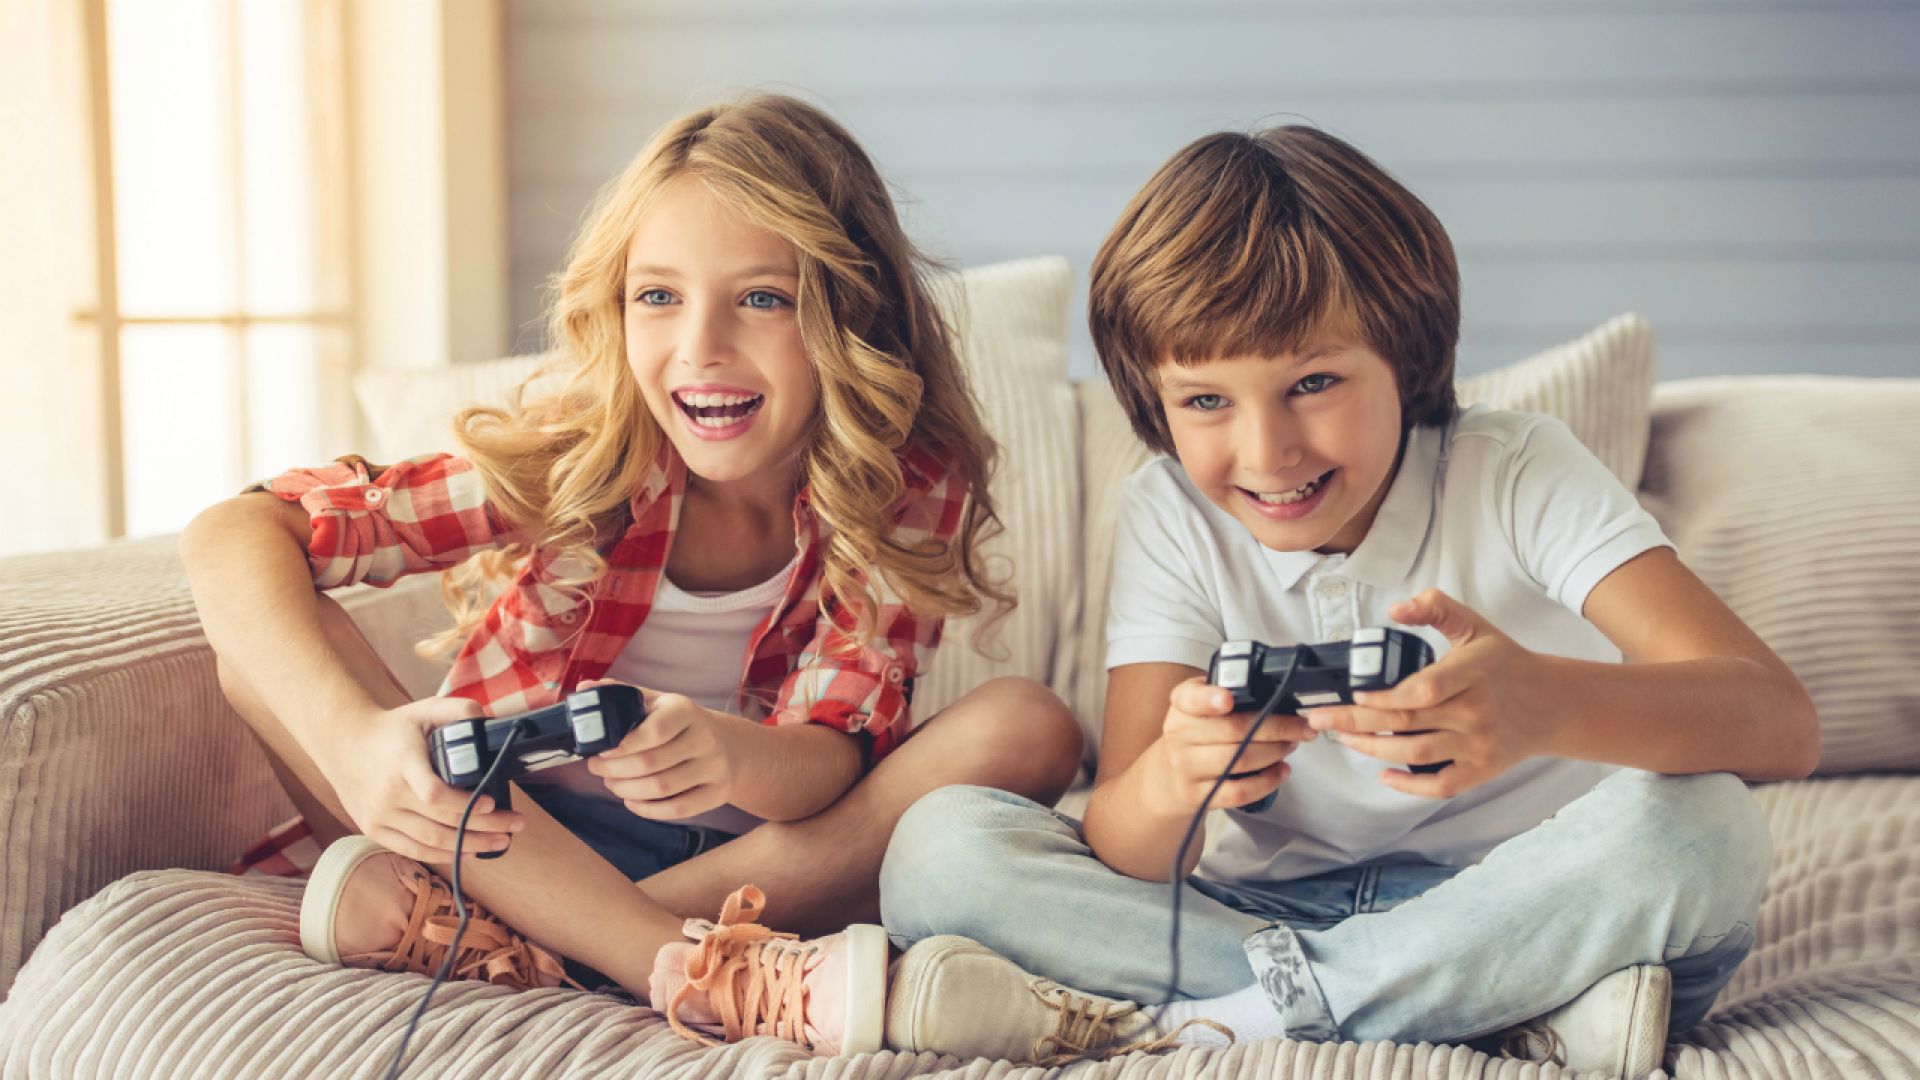 Best Non-Violent Video Games For Your Kids